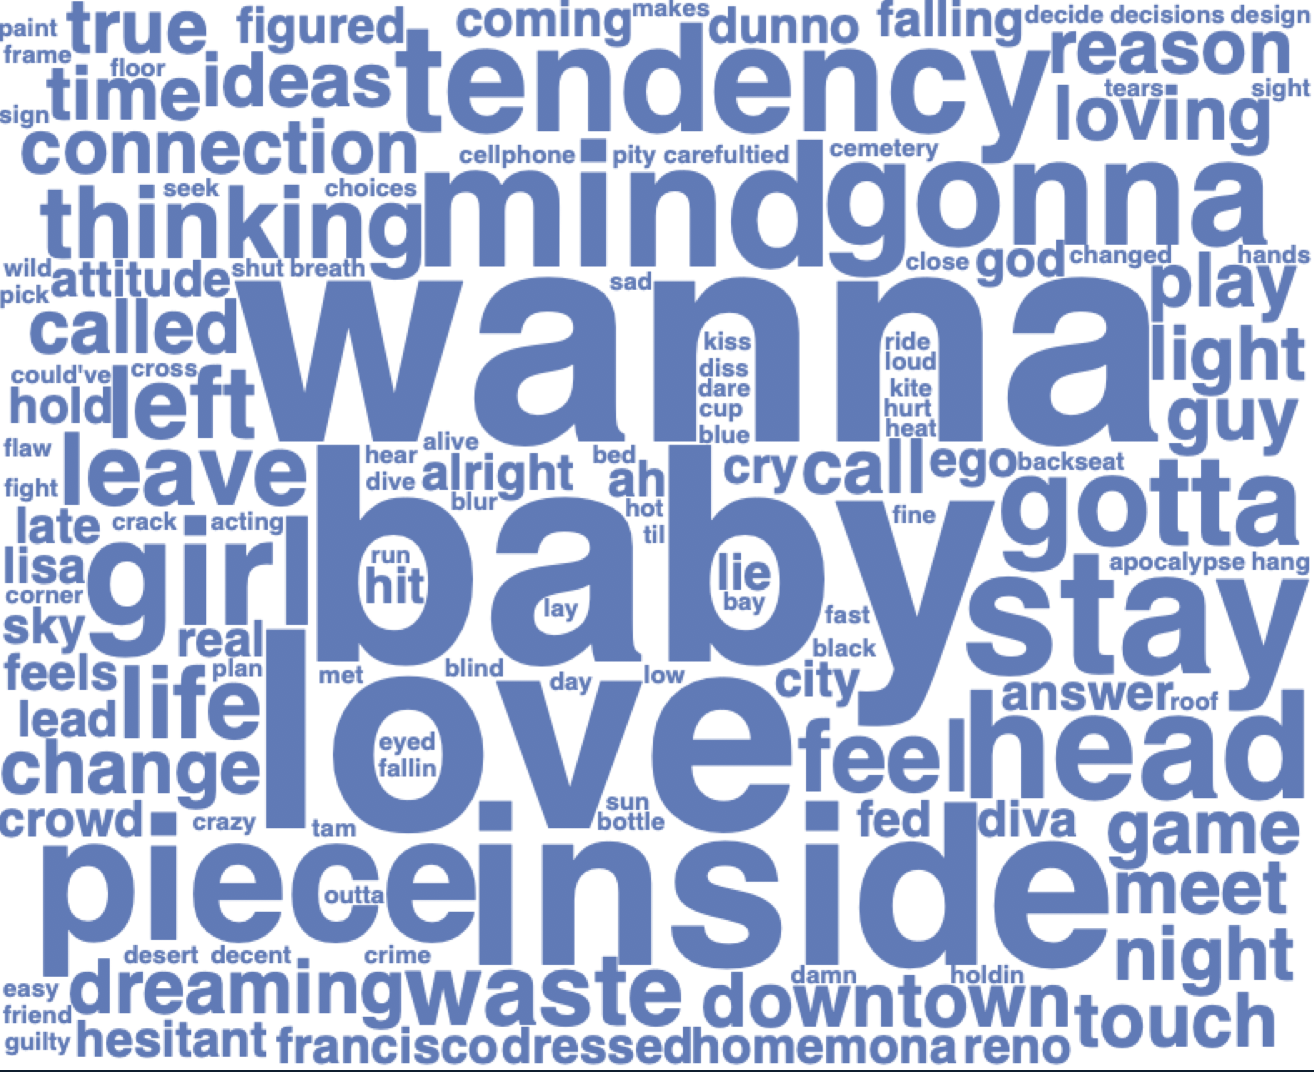 Top Words for Boo Boo (2017) word cloud